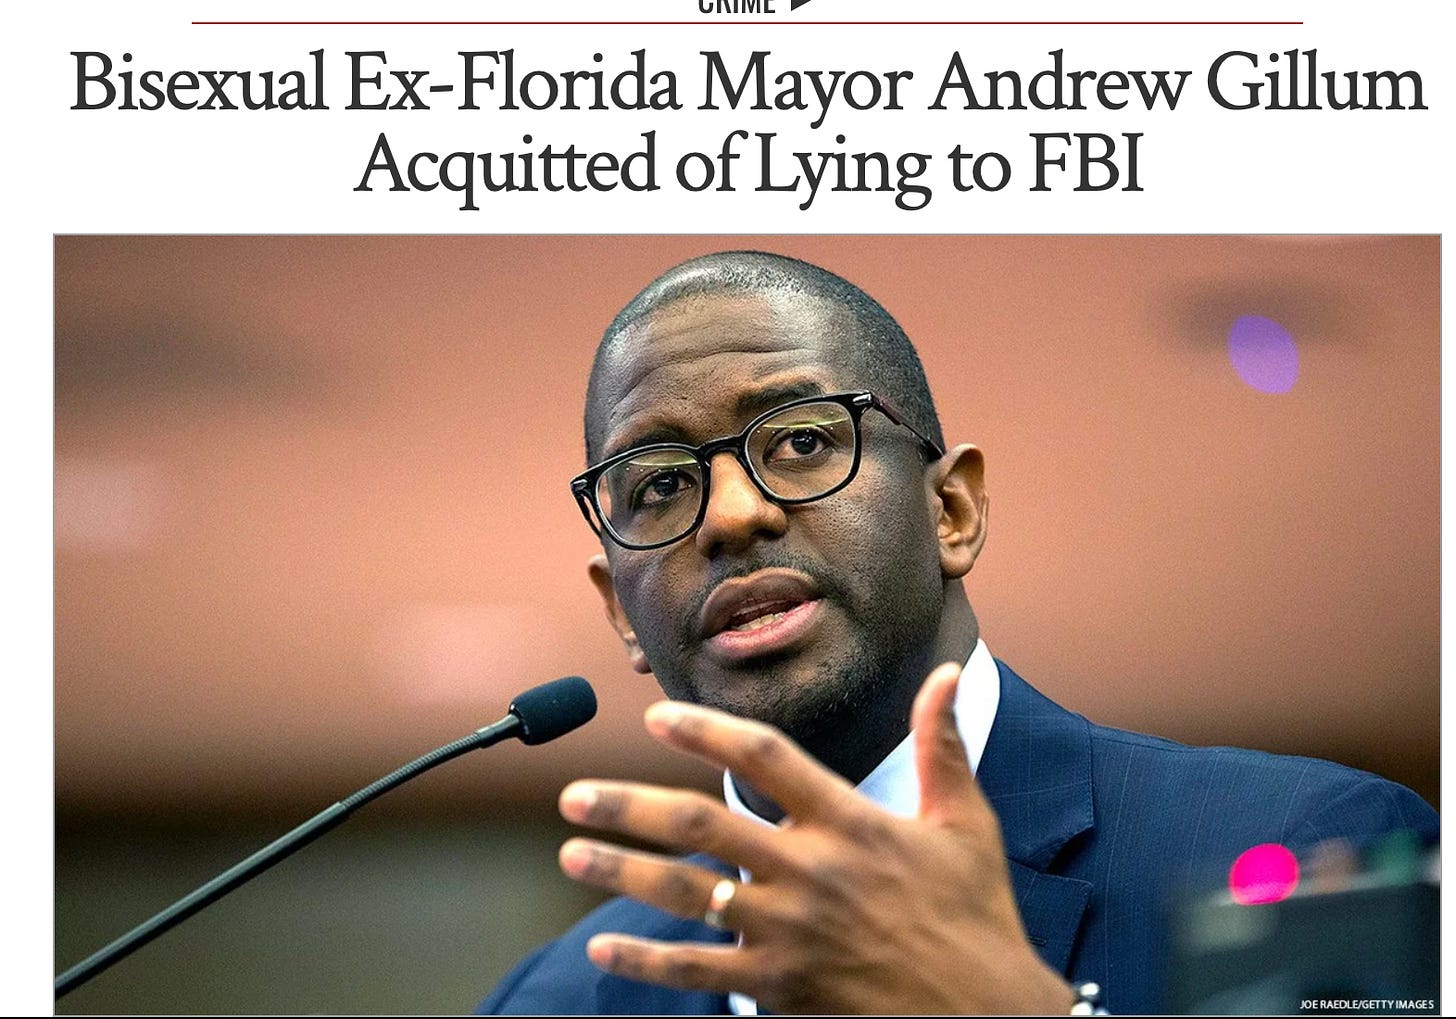 Bisexual Ex-Florida Mayor Andrew Gollum Acquitted of Lying to the FBI